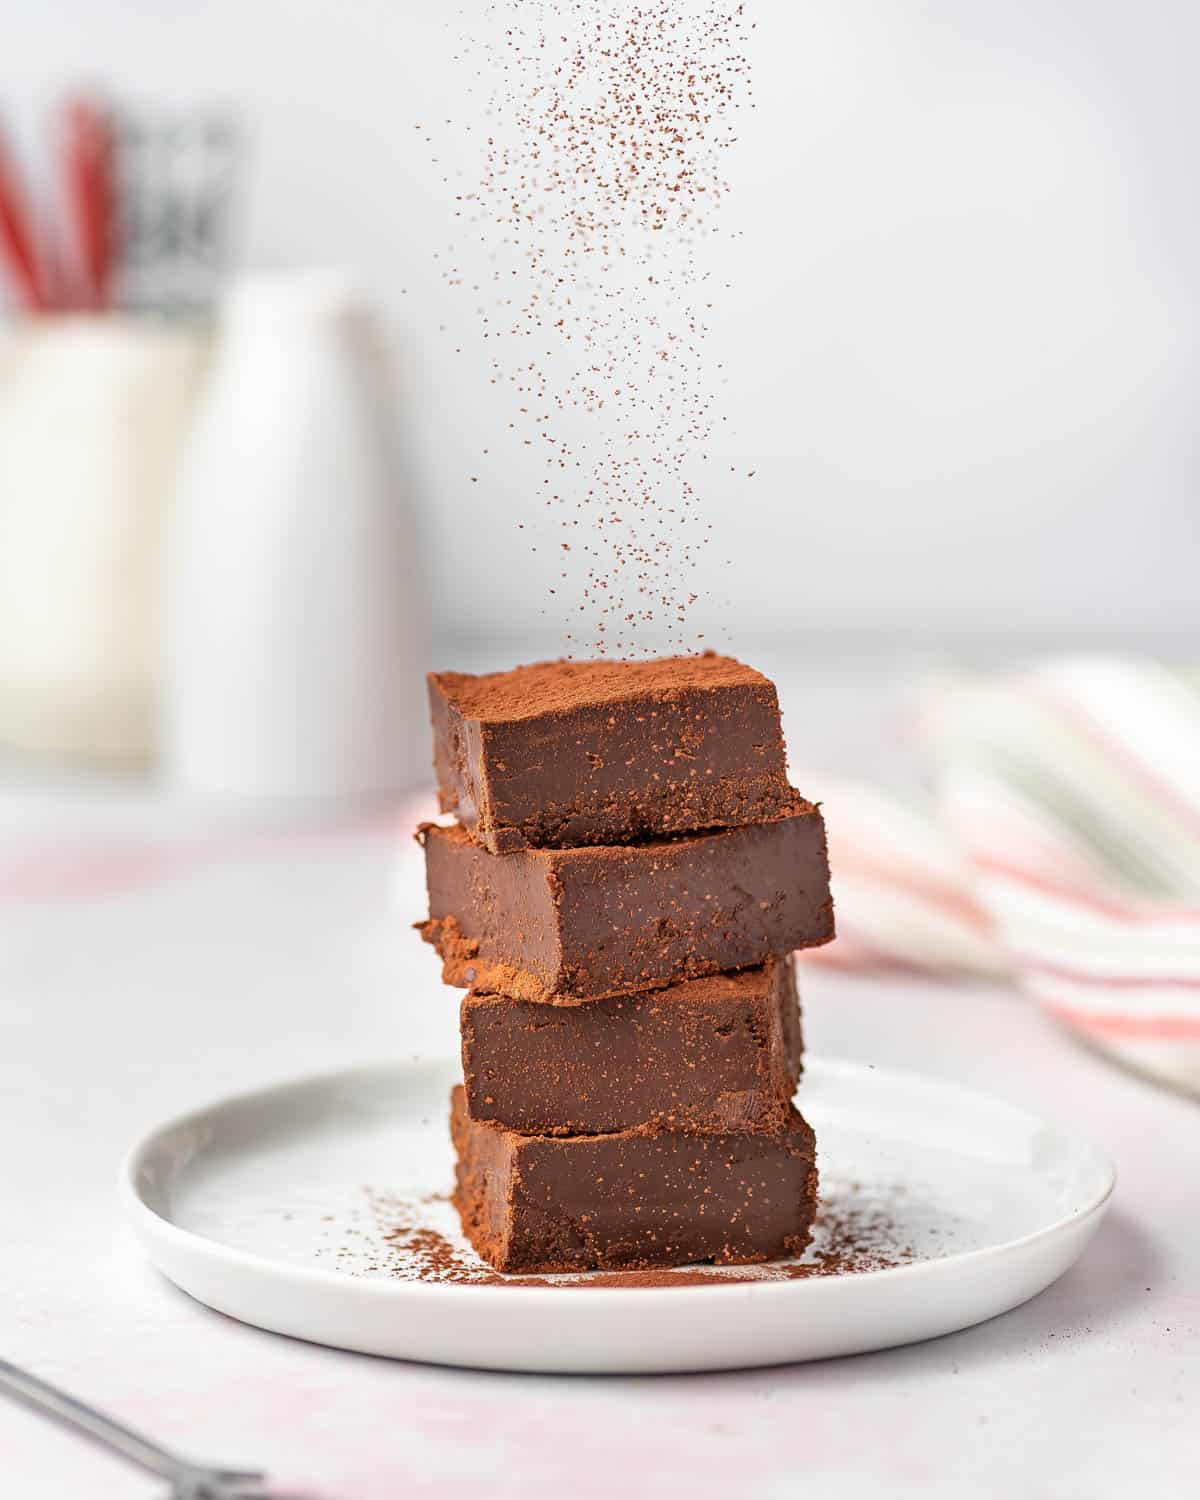 A plate with a stack of nama chocolates with cocoa dusted on top.